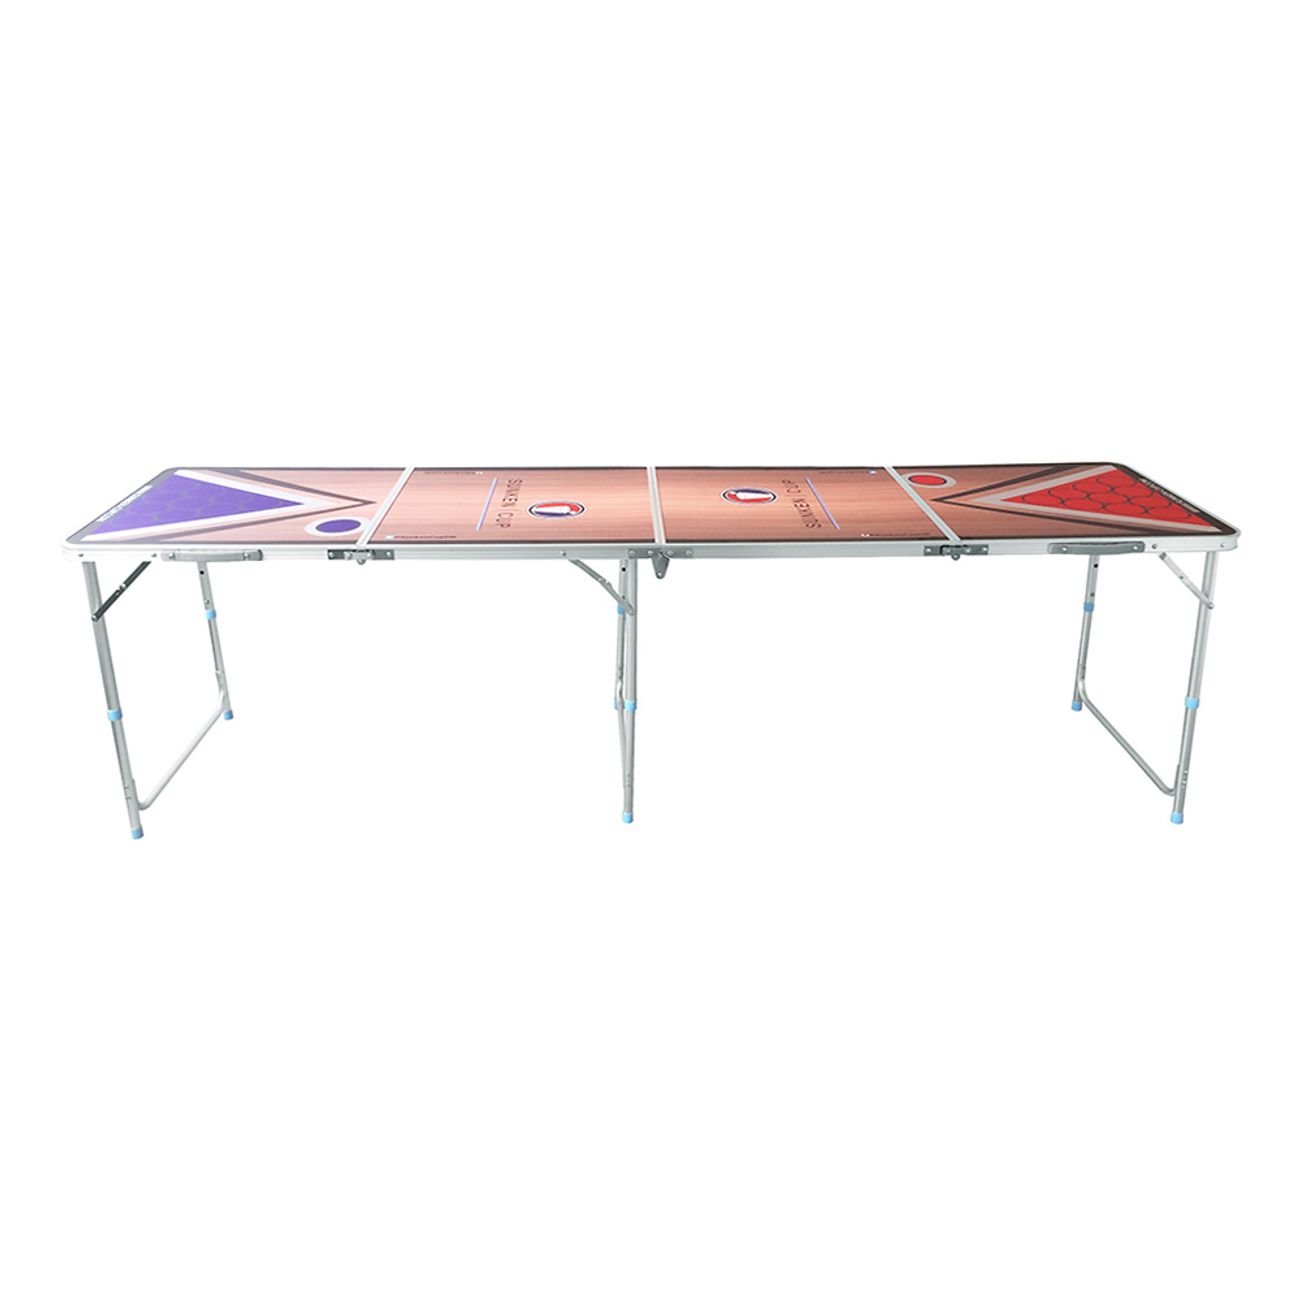 beer-pong-tables-2